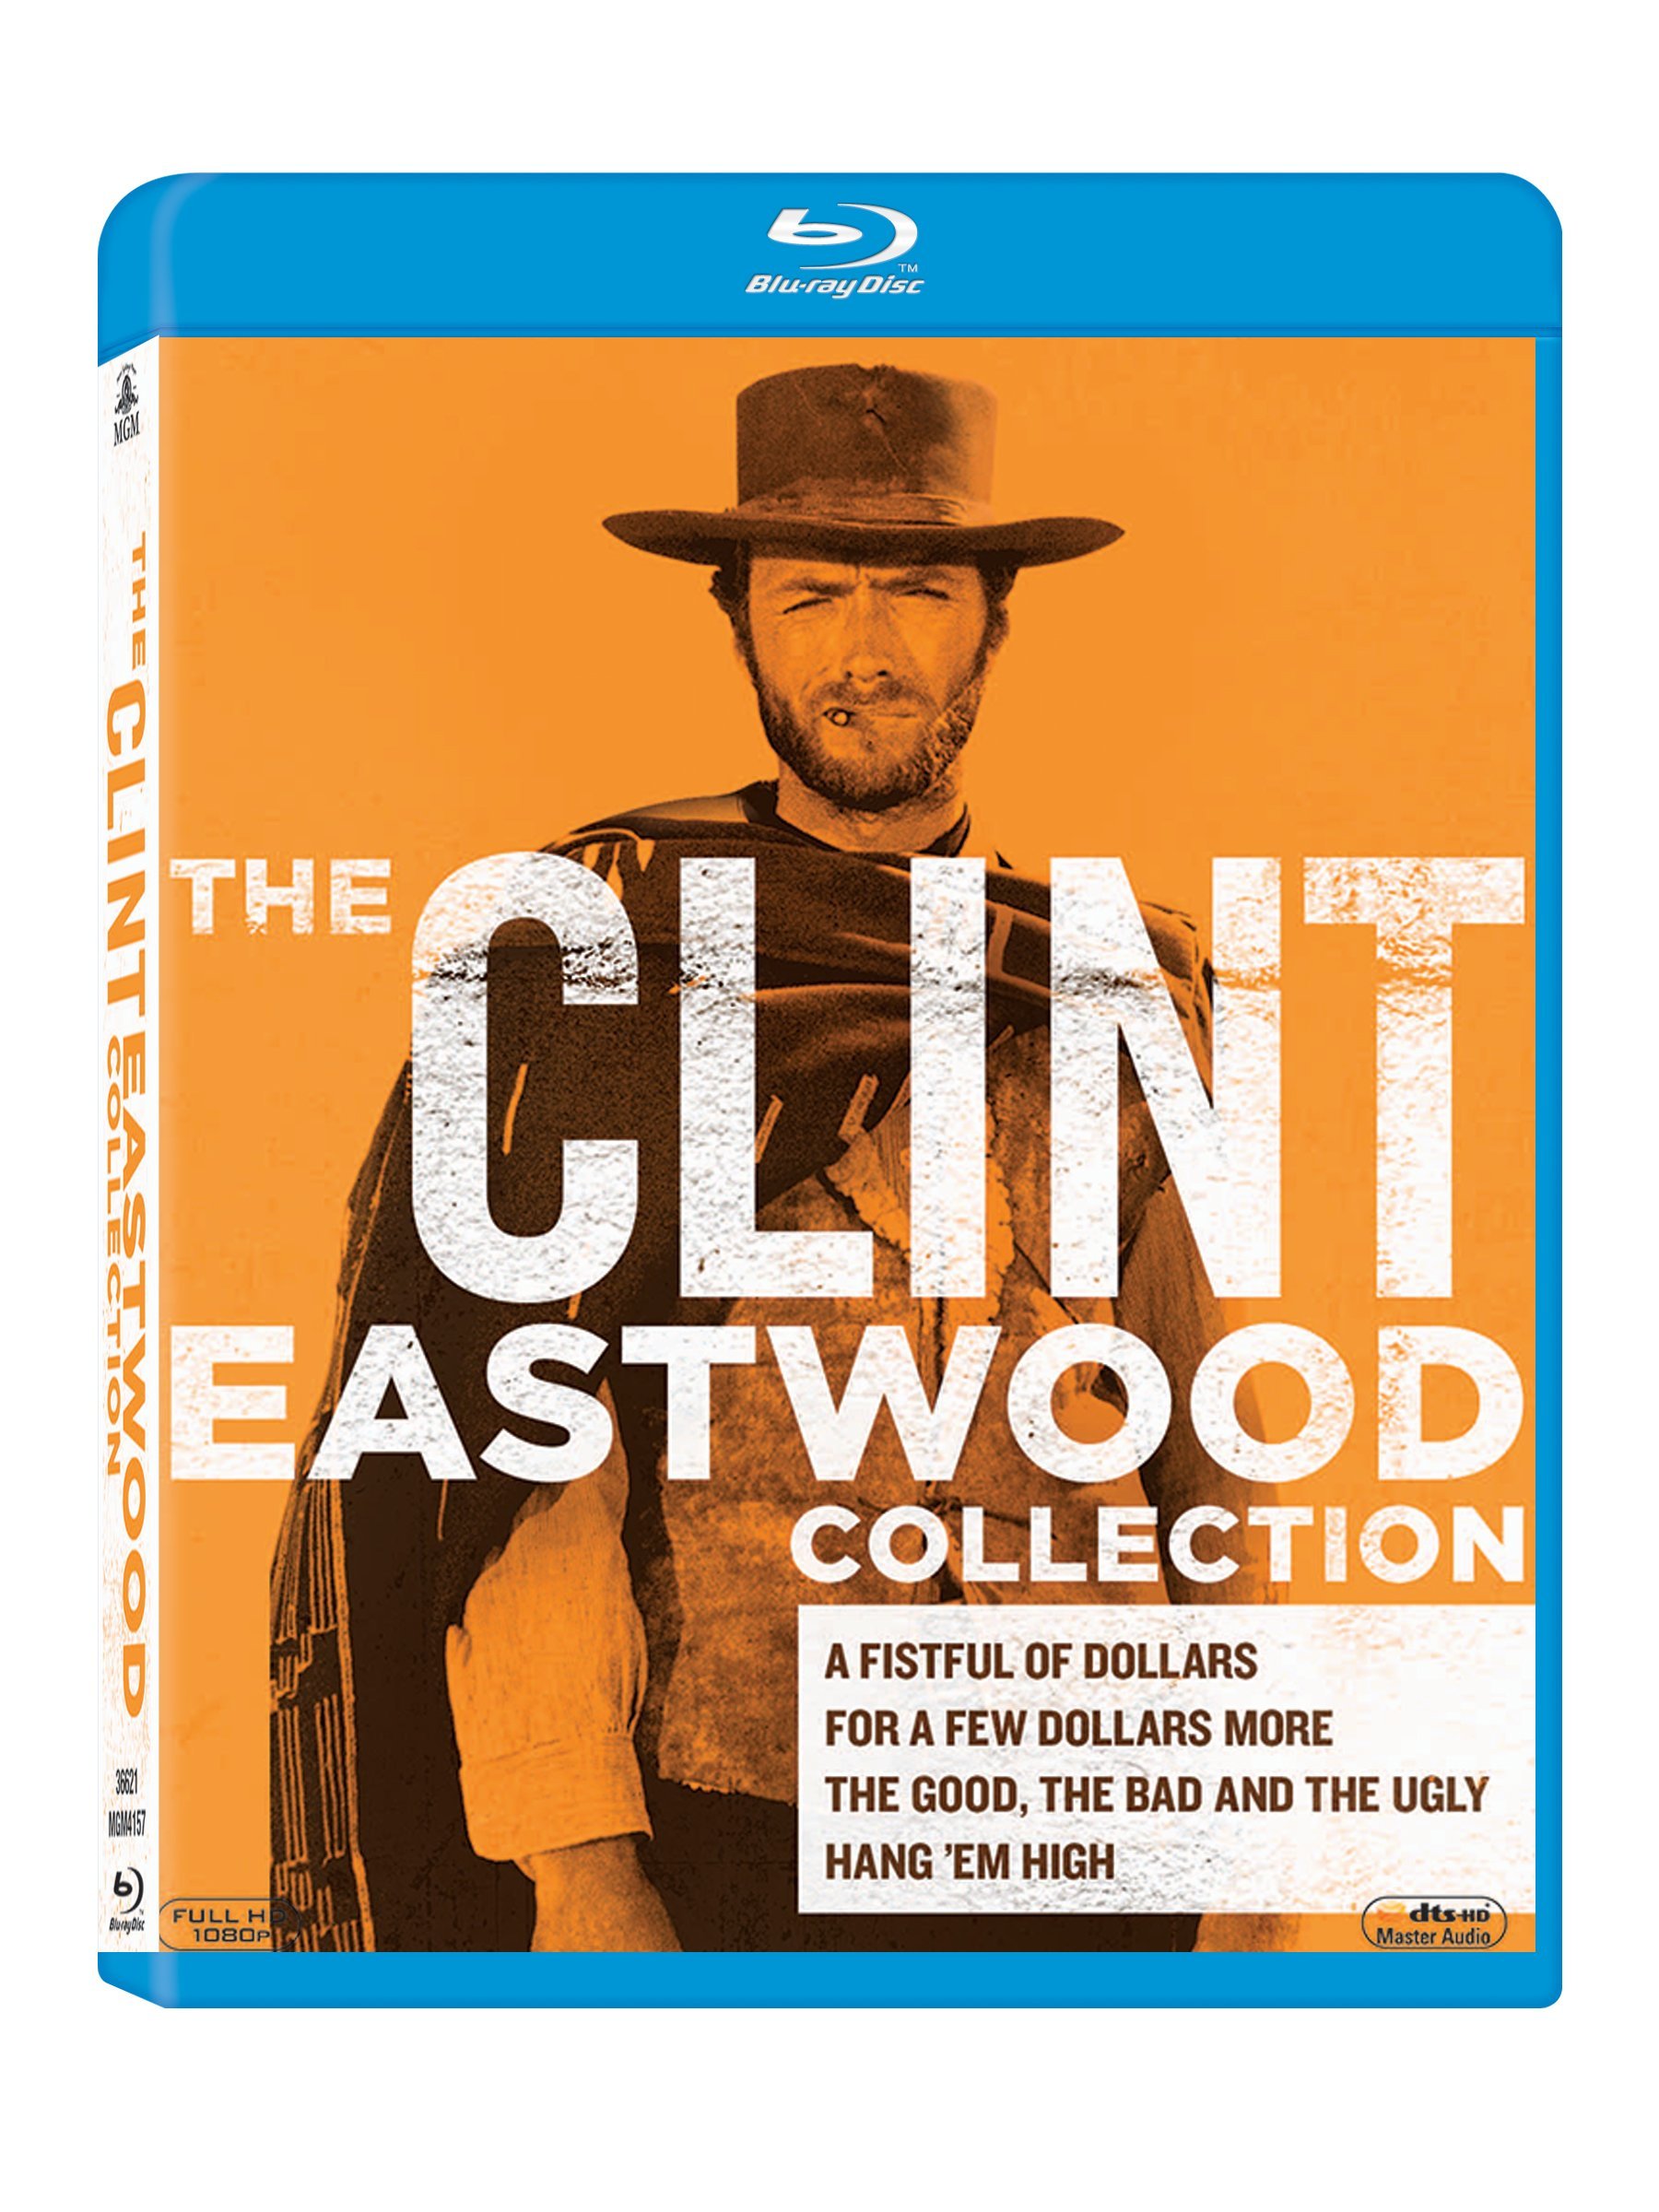 the-clint-eastwood-collection-4-movies-a-fistfull-of-dollars-for-a-few-dollars-more-the-good-the-bad-and-the-ugly-hangem-high-4-disc-box-set